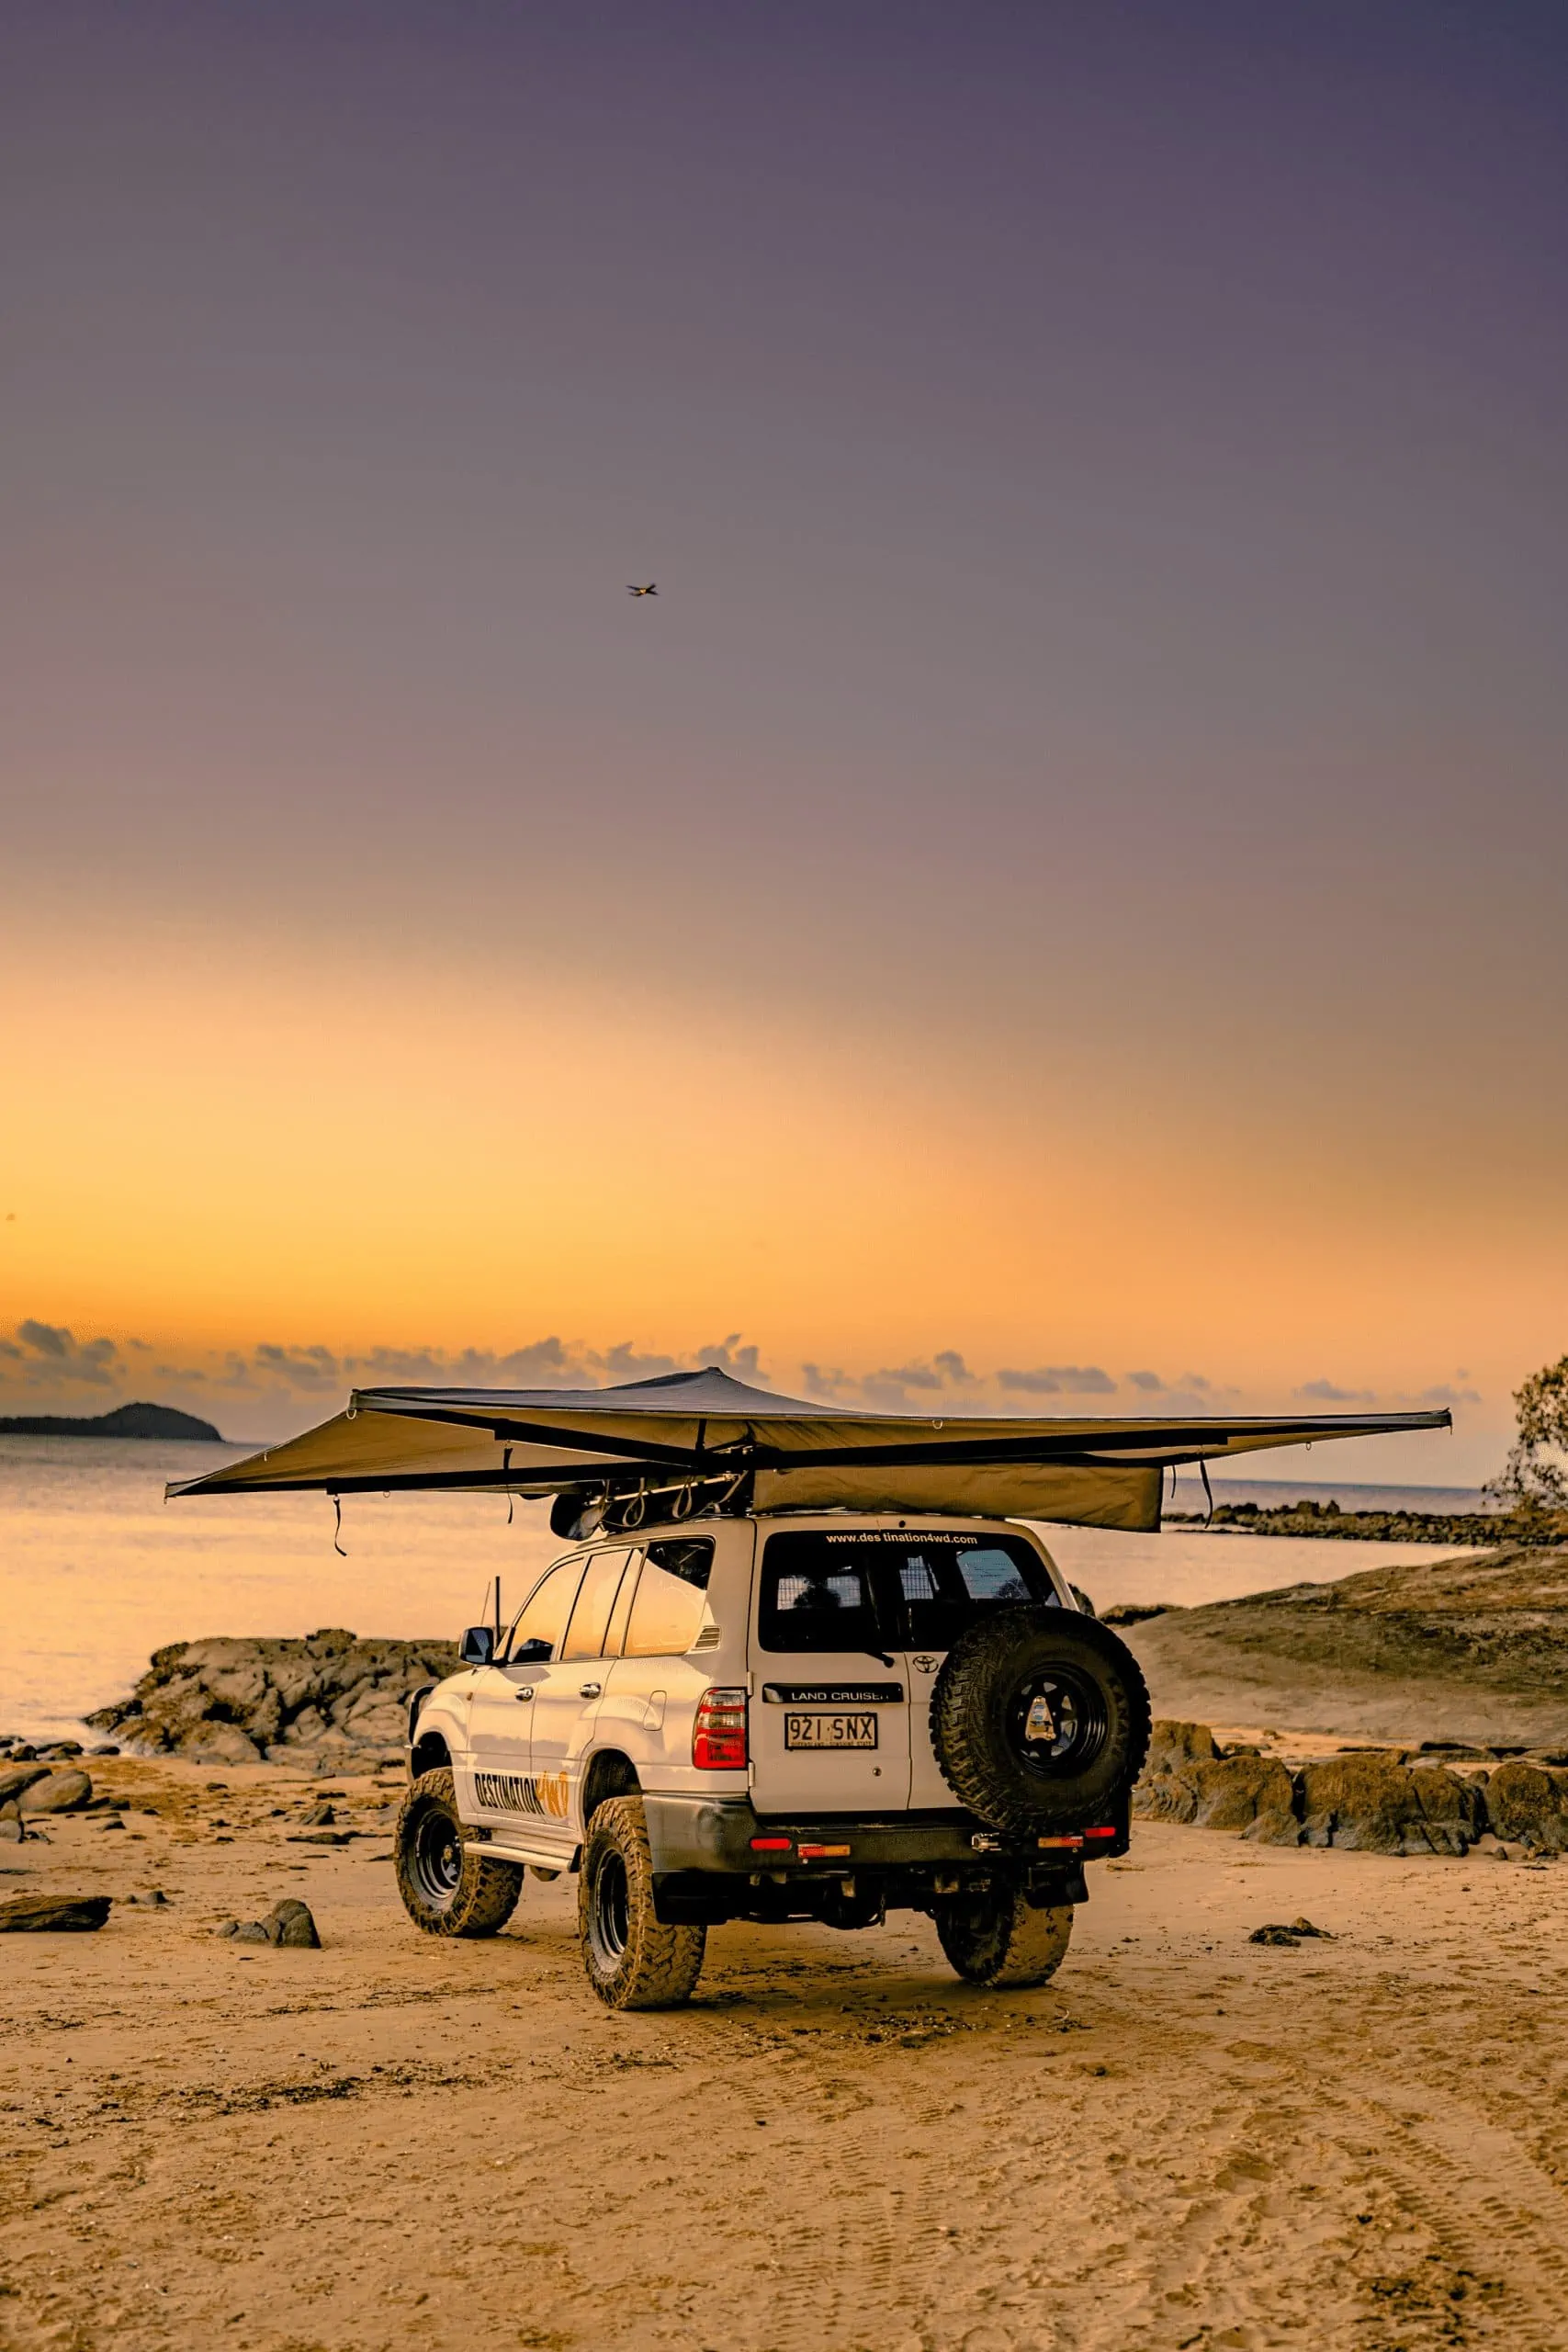 Destination4WD awnings to extend your shade in Australia